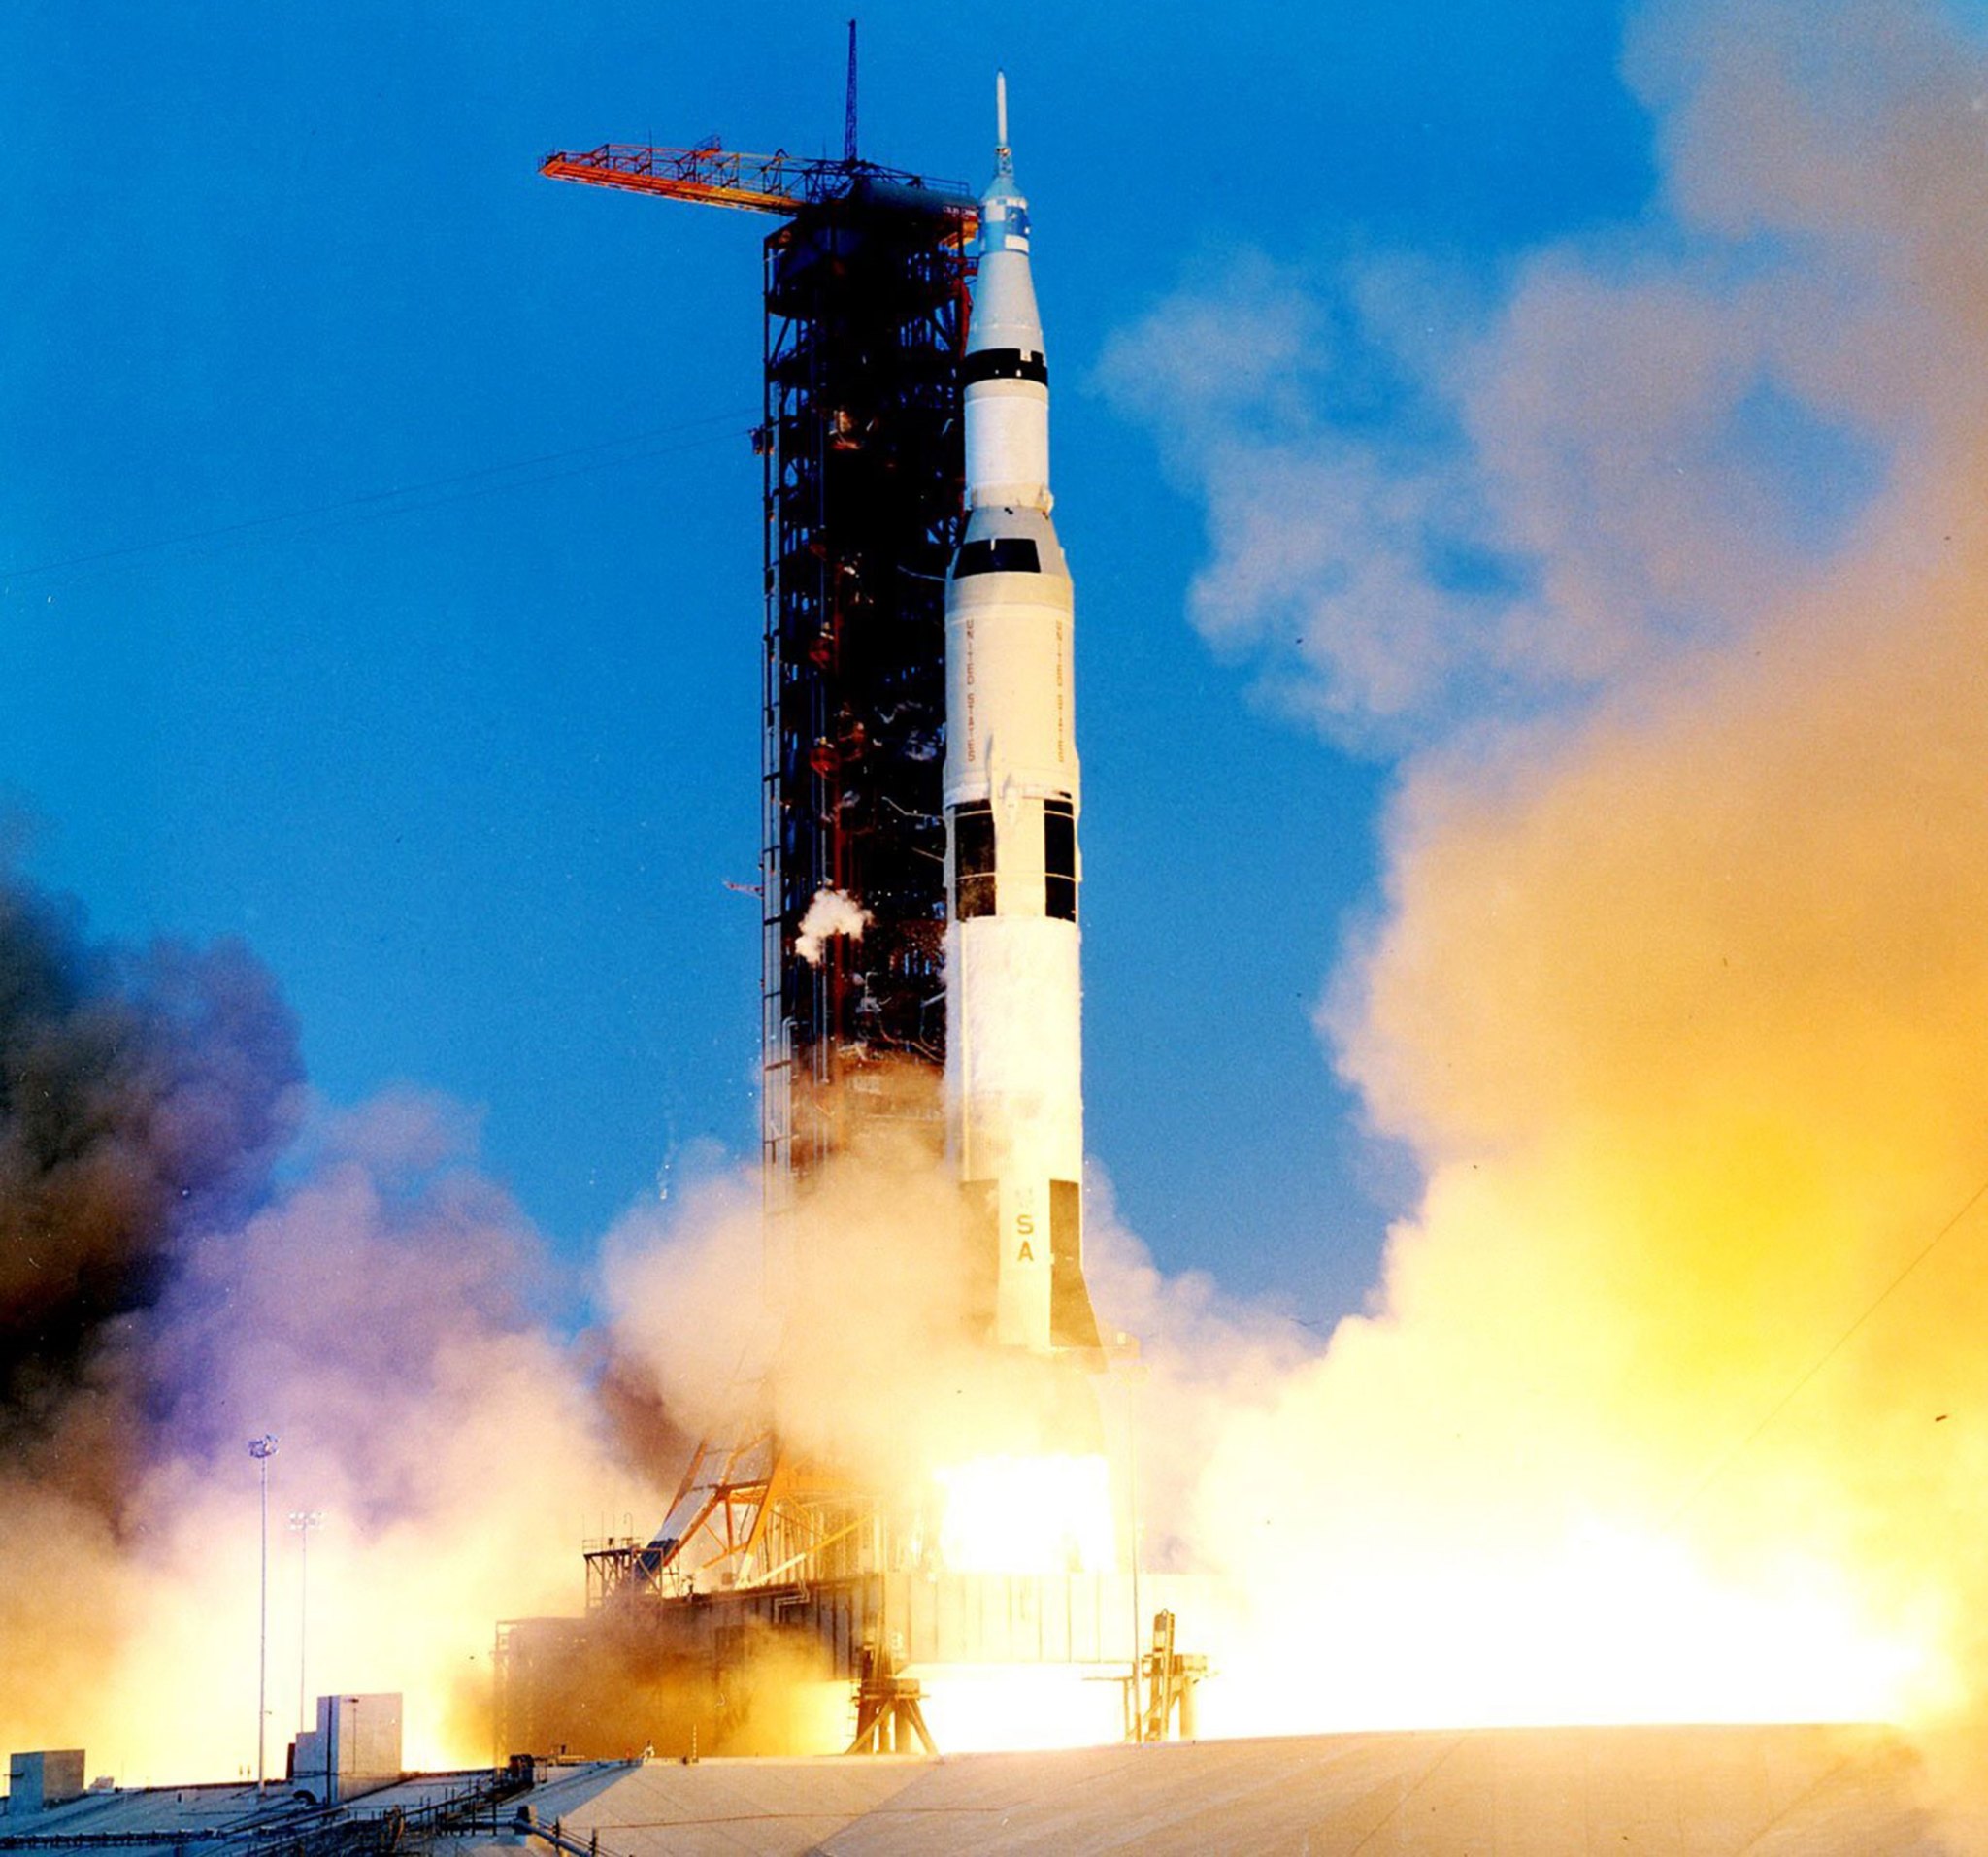 Liftoff of the Apollo 13 mission from Launch Pad 39A at Kennedy Space Center in Florida on April 11, 1970.